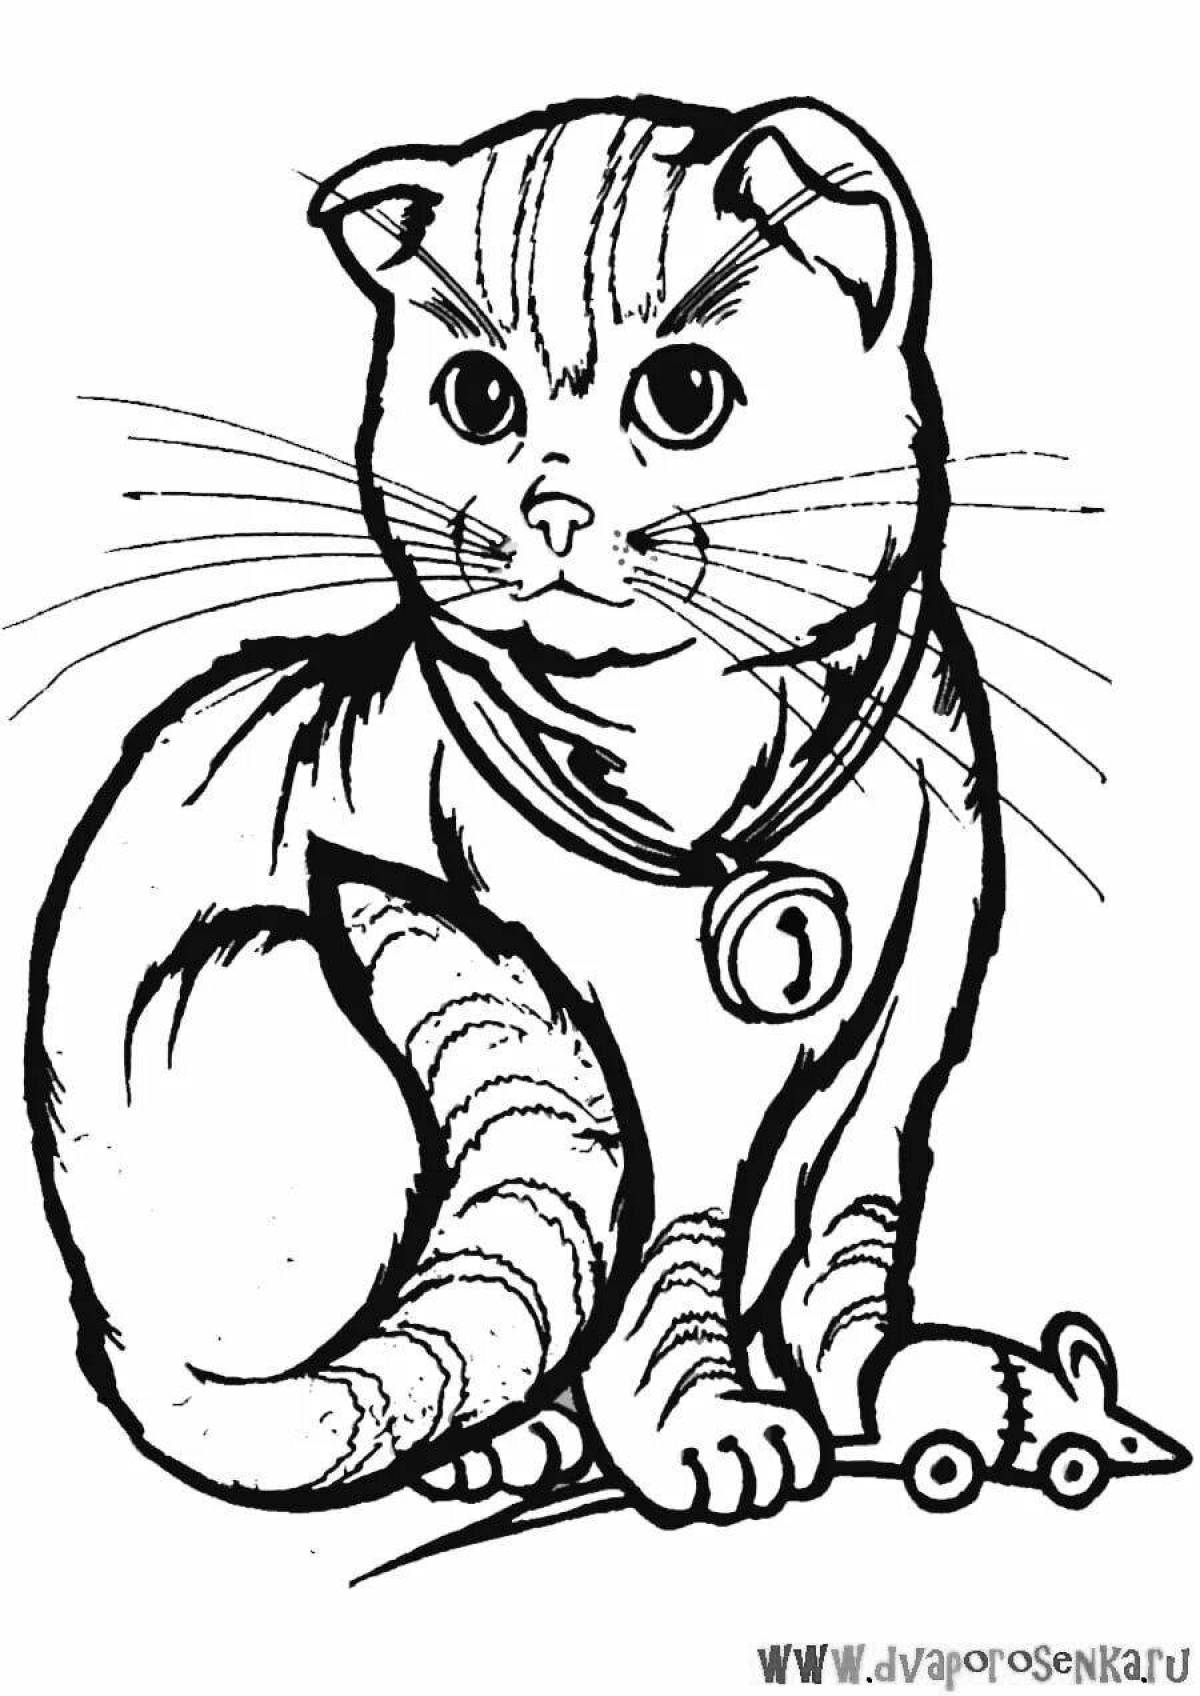 Colorful scottish cat coloring page